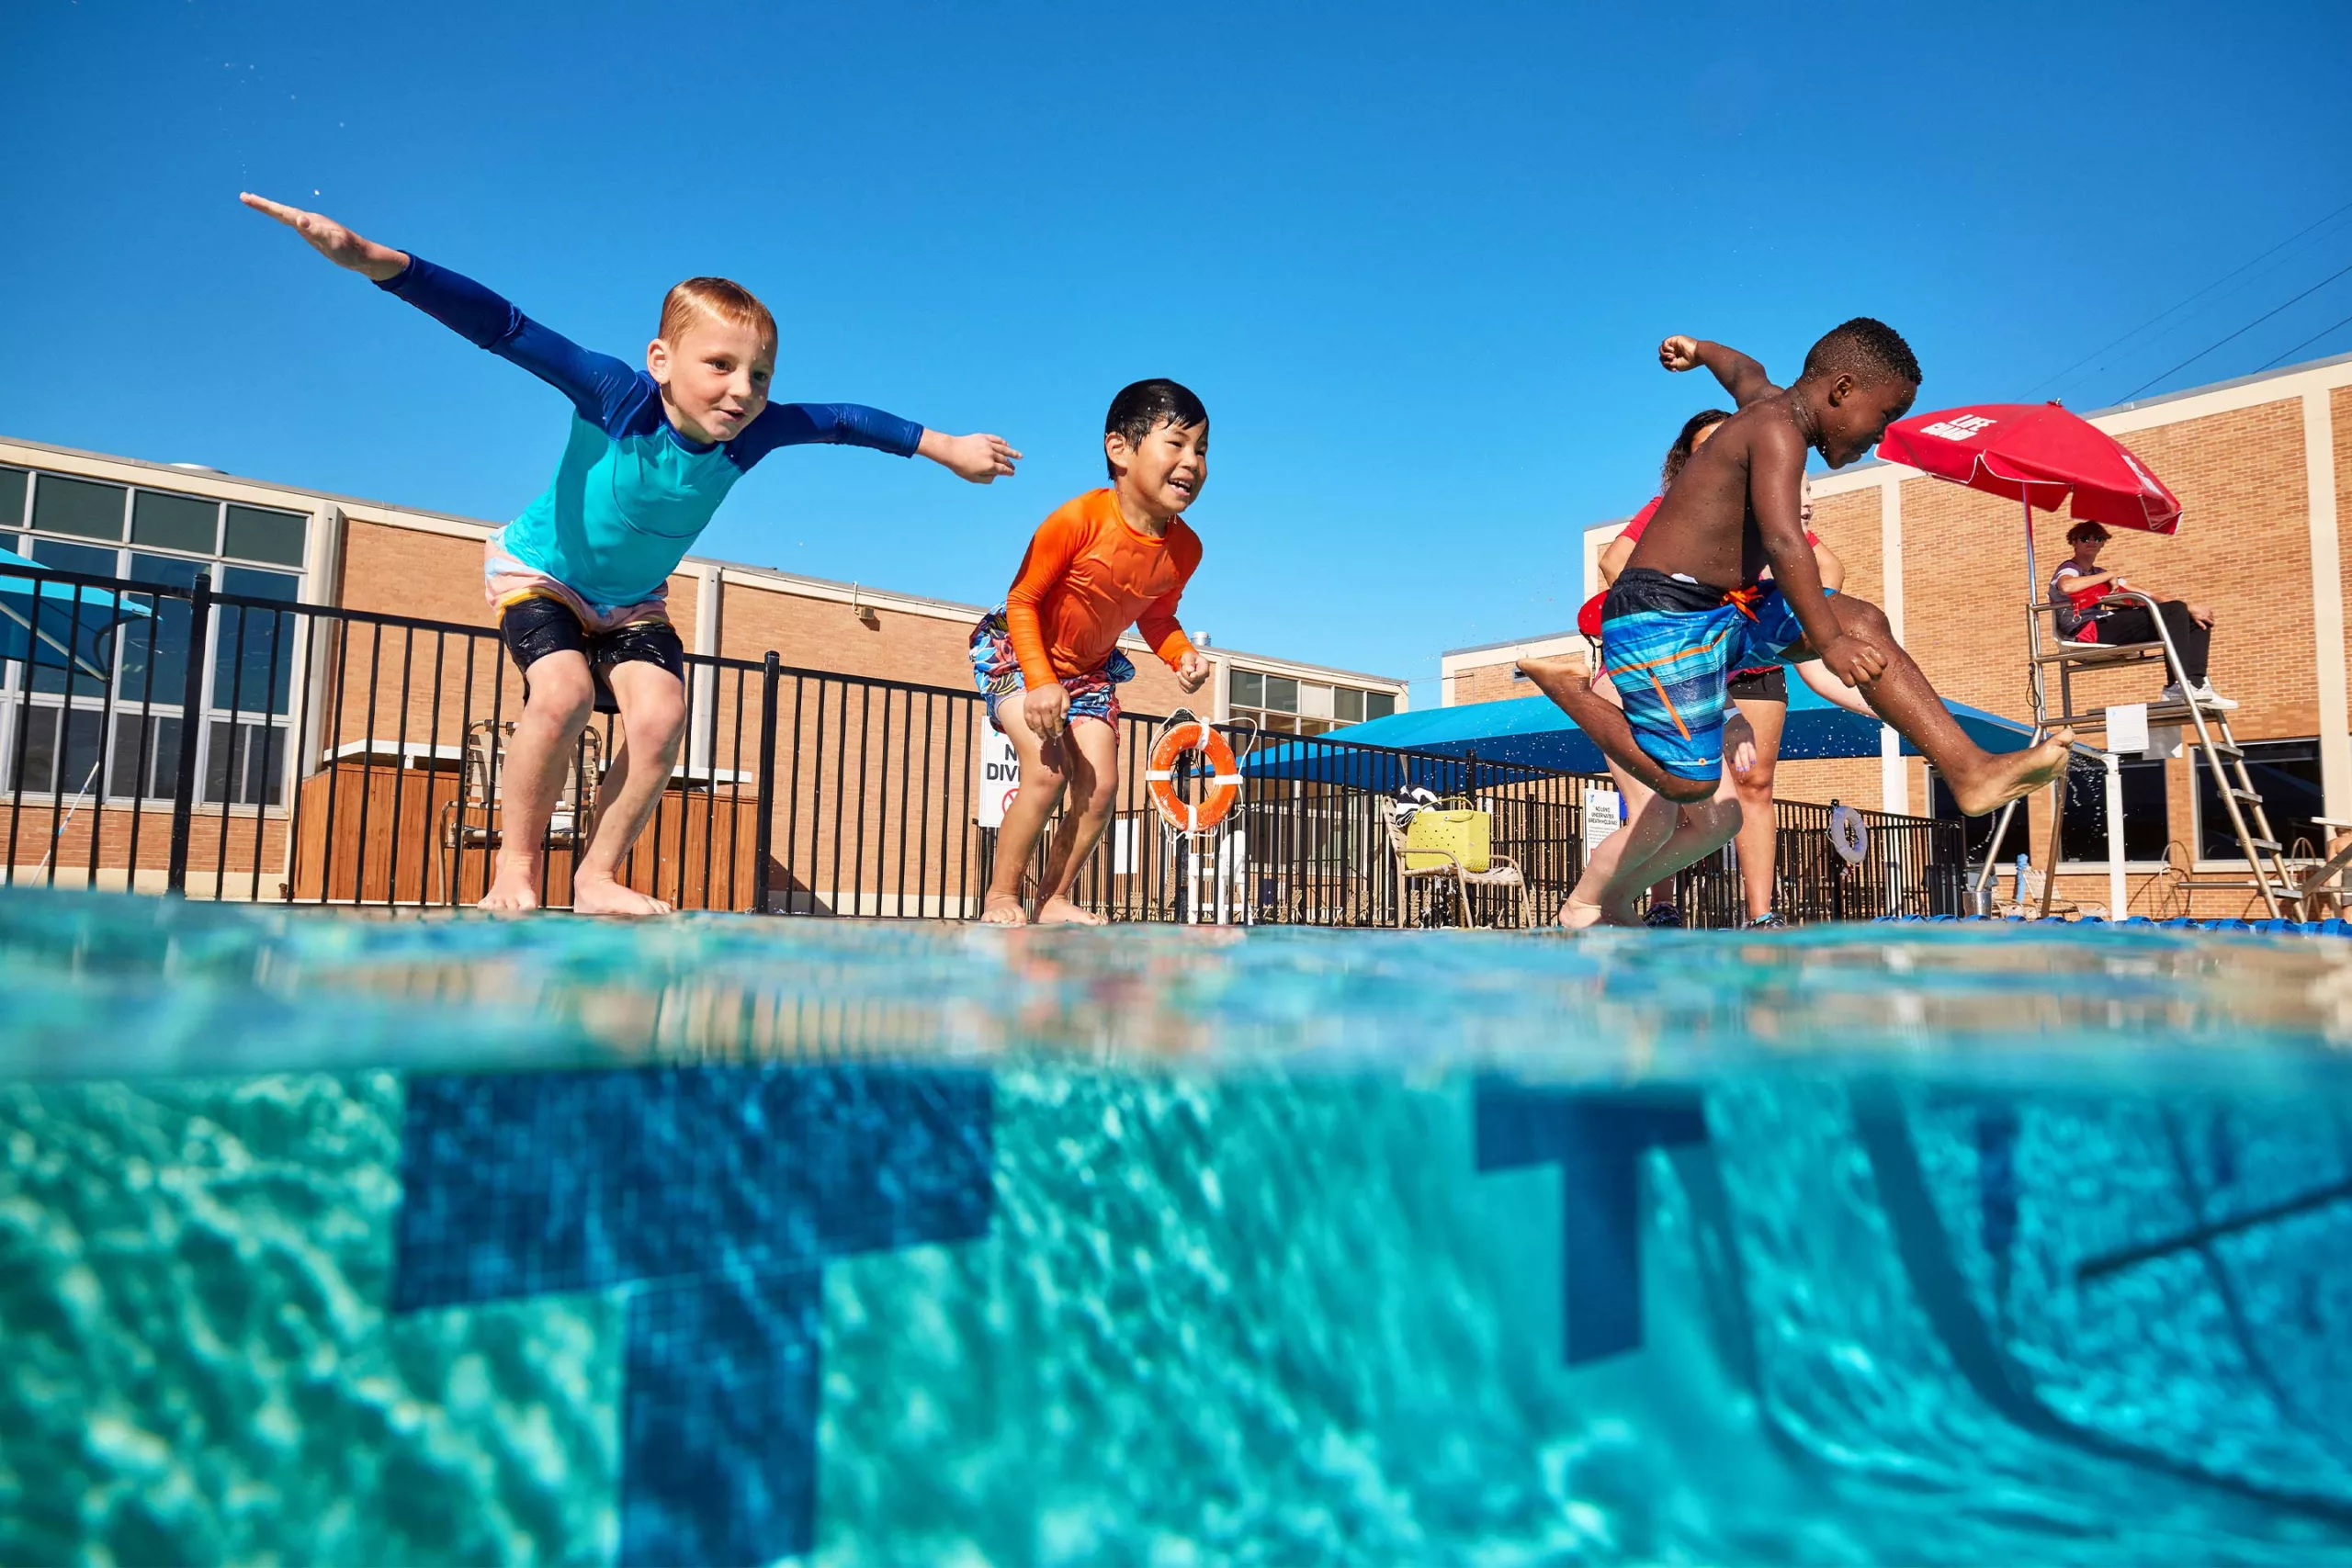 Children stand at the edge of the pool on the verge of jumping in. They are having fun.